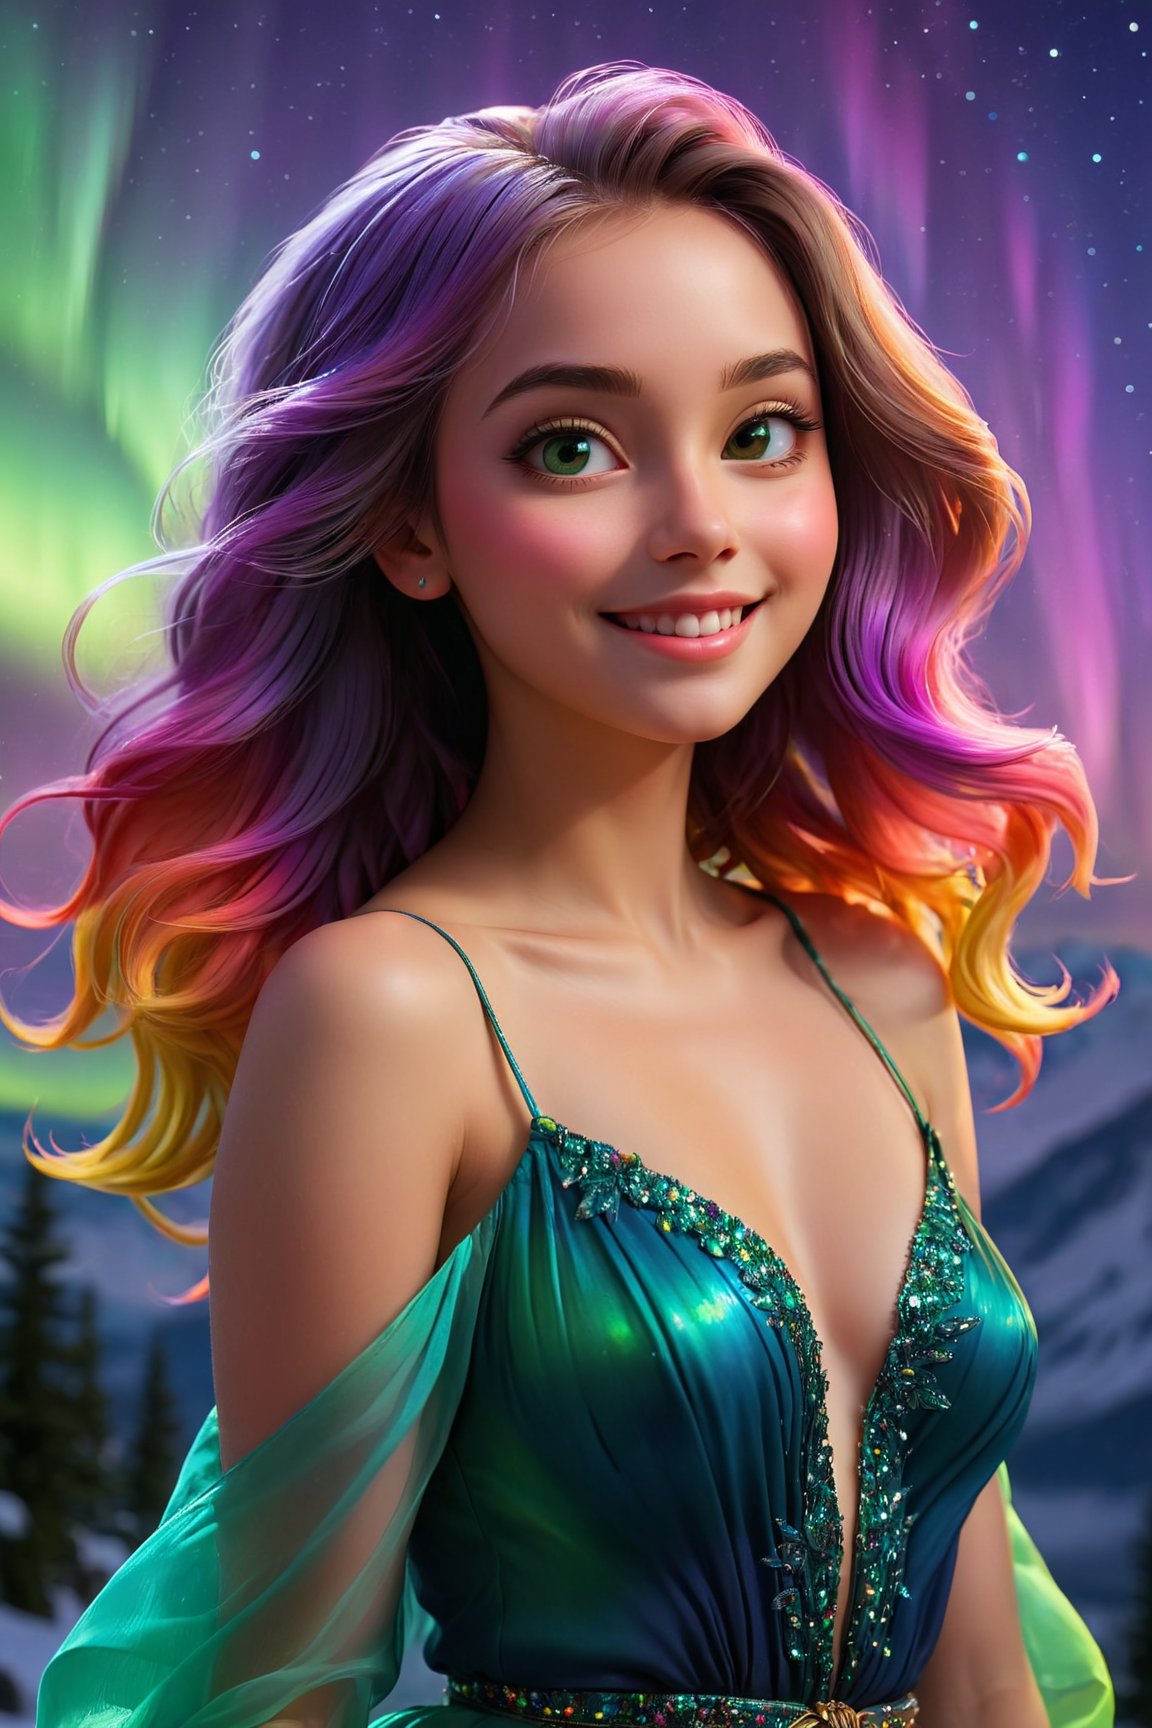 (best quality,8K,highres,masterpiece), ultra-detailed, (super colorful, vibrant), enchanting image of a beautiful girl with a shoulder-length angled blunt-ends hairstyle. Her smile radiates warmth and positivity without any hint of arrogance. She stands gracefully under the mesmerizing glow of the aurora borealis in a vibrant night scene. The surrounding atmosphere is filled with a kaleidoscope of colors, creating a vibrant and ethereal dance of light. The girl embodies Nocturnal Grace, exuding Silent Luminescence amidst the Midnight Flutter of colors and the Whispering Silent beauty of the night. Every moment is an Iridescent Encounter with the Moonlit Shadow, celebrating a captivating and colorful display of artistry.